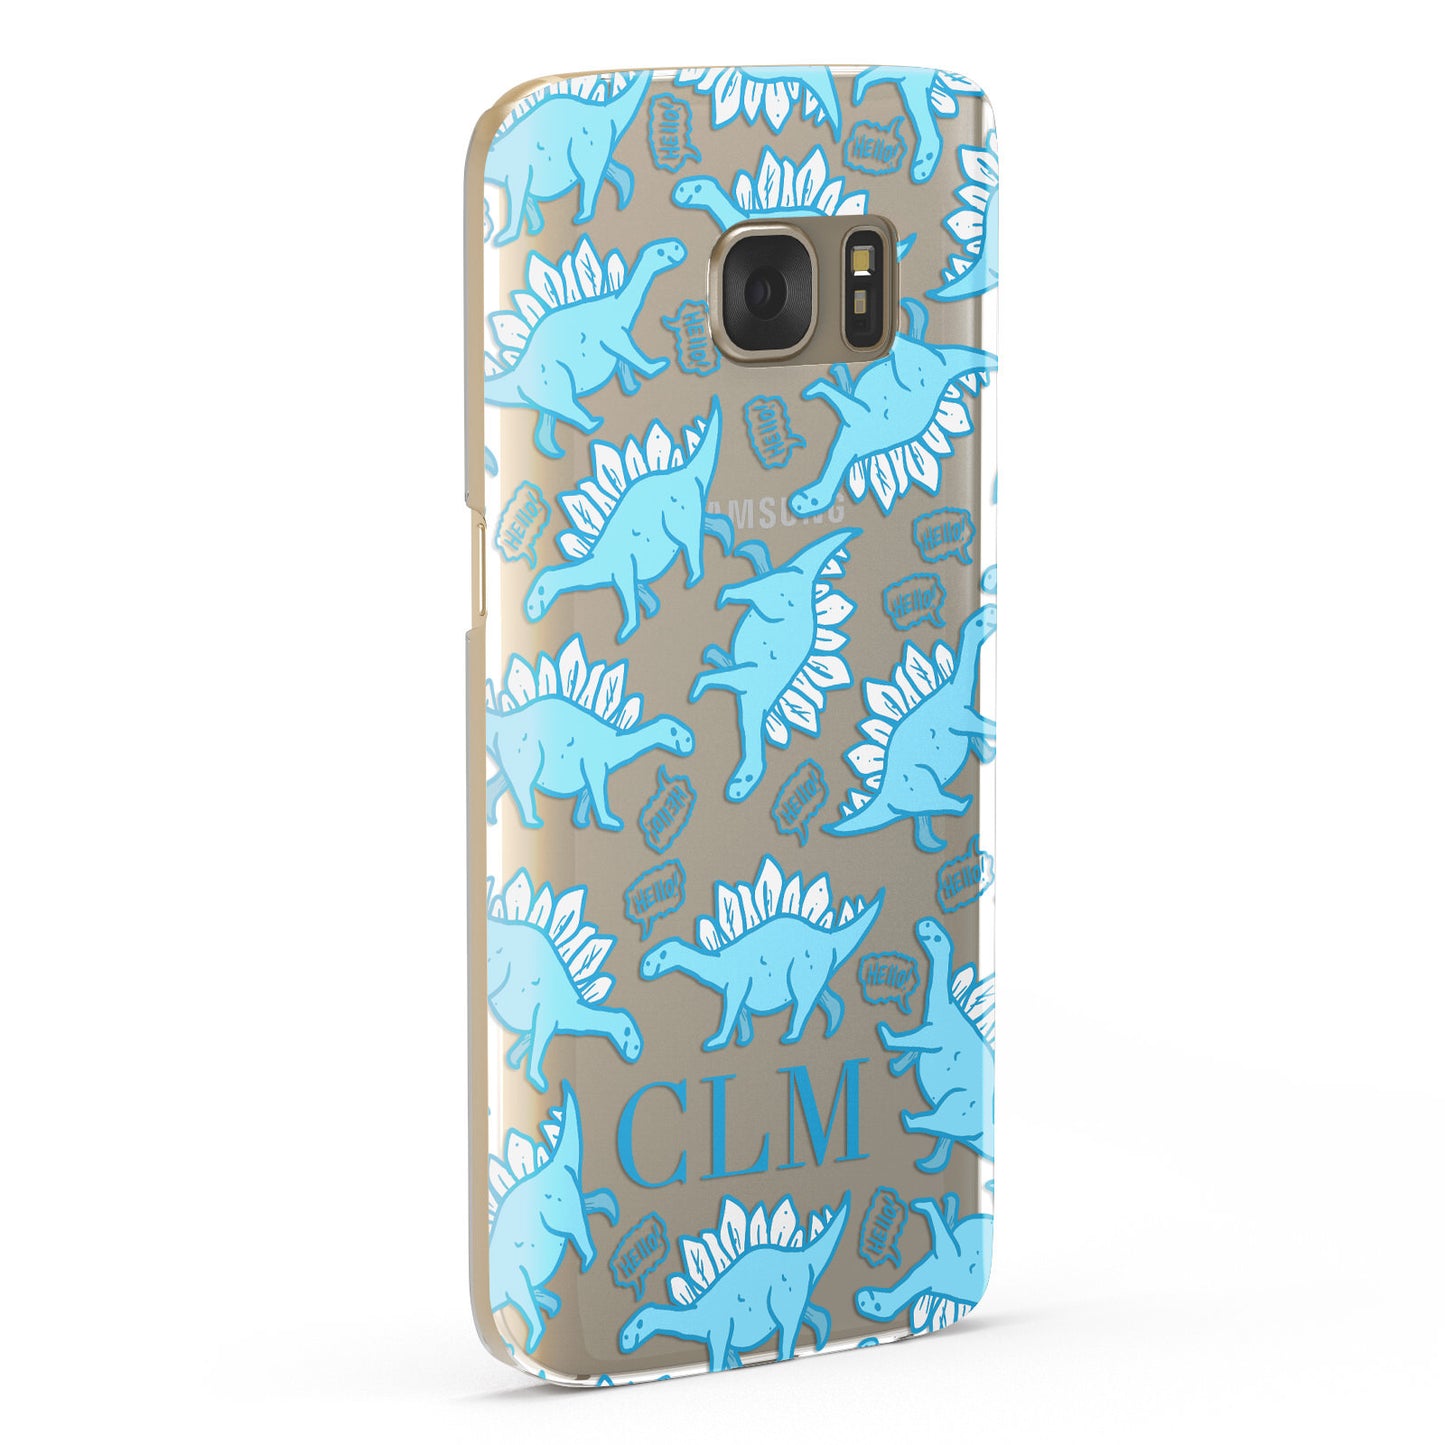 Personalised Dinosaur Initials Samsung Galaxy Case Fourty Five Degrees